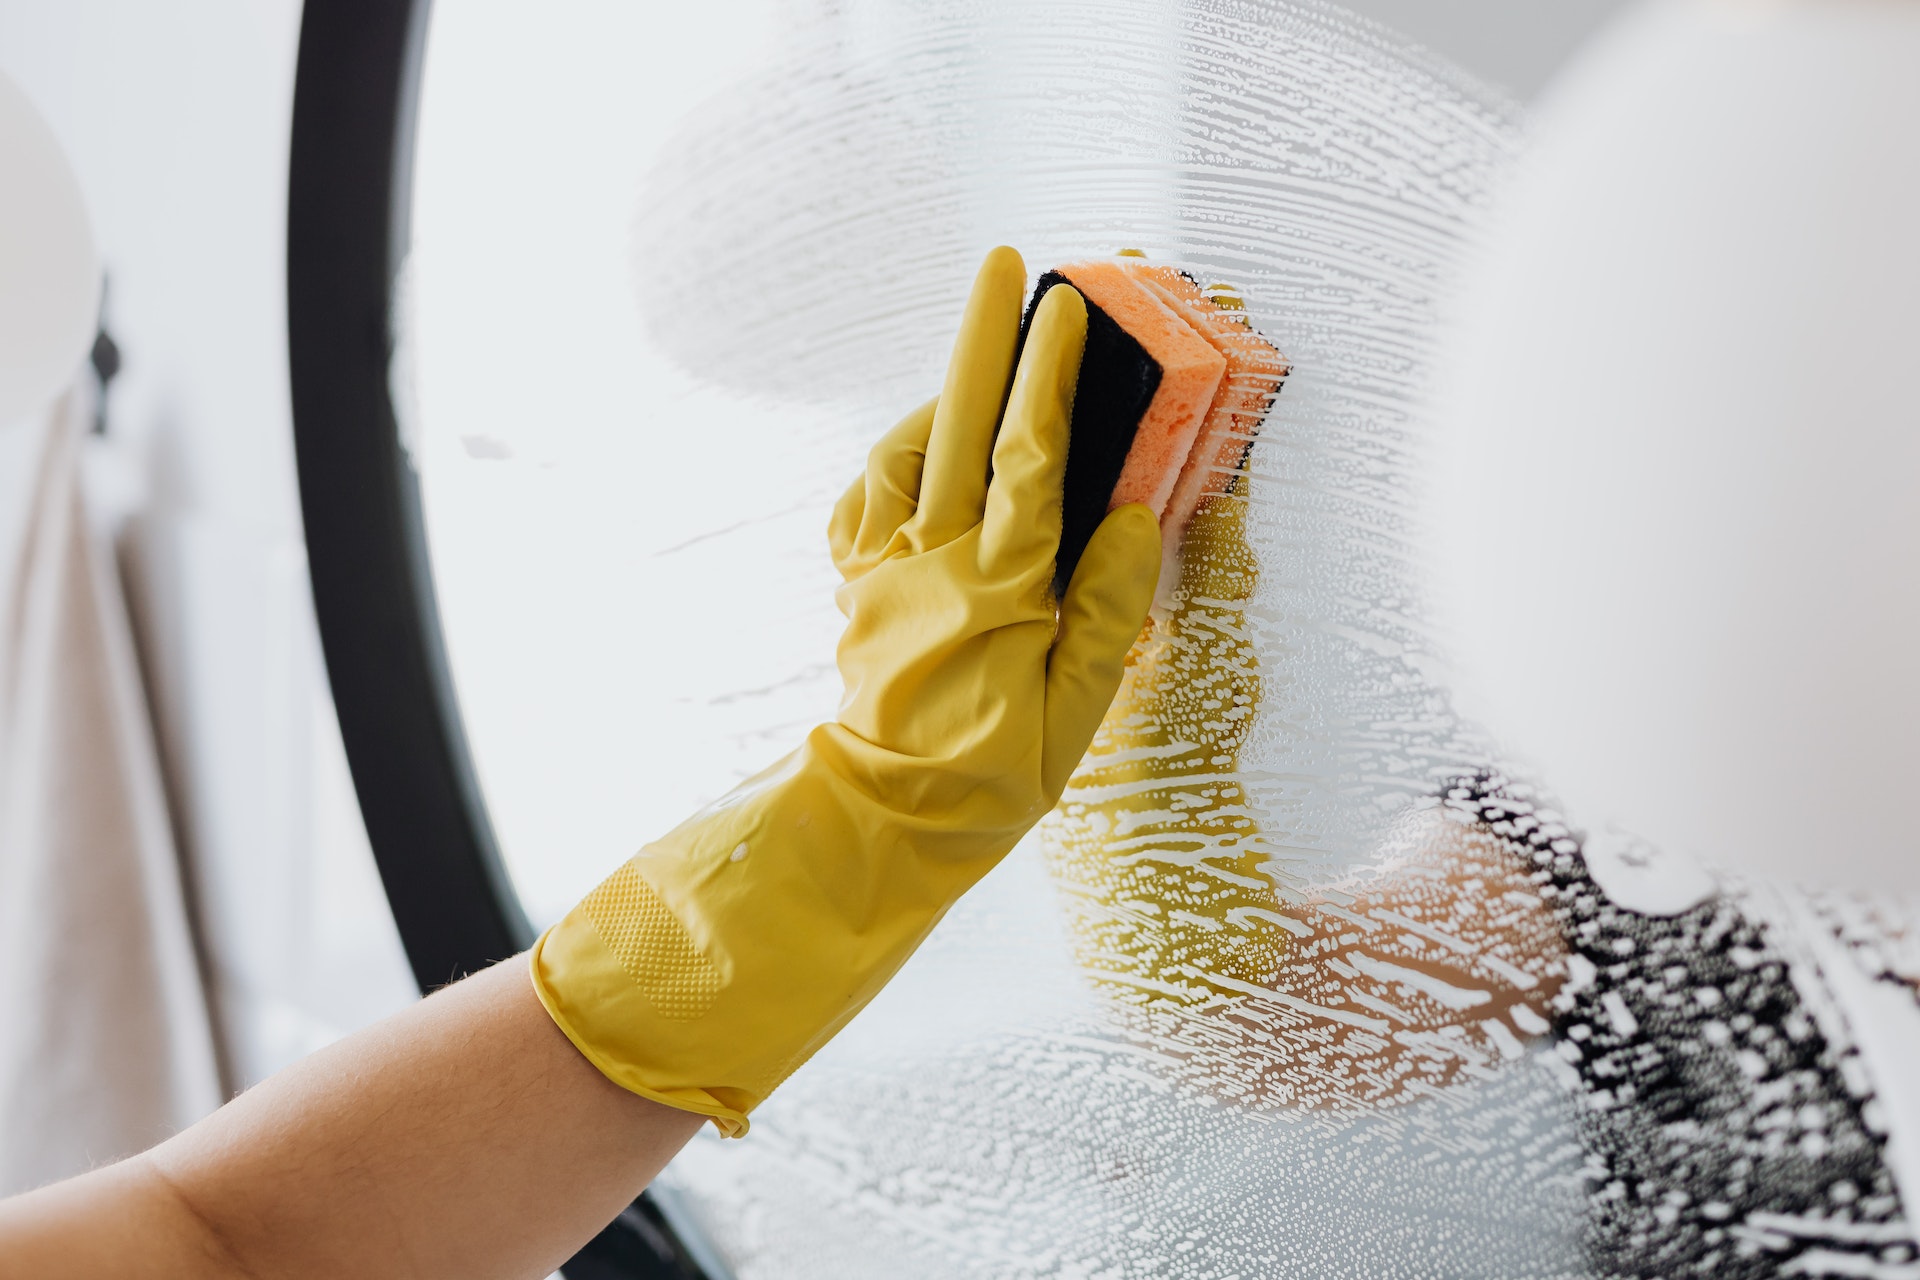 A woman wearing yellow cleaning gloves wiping a mirror